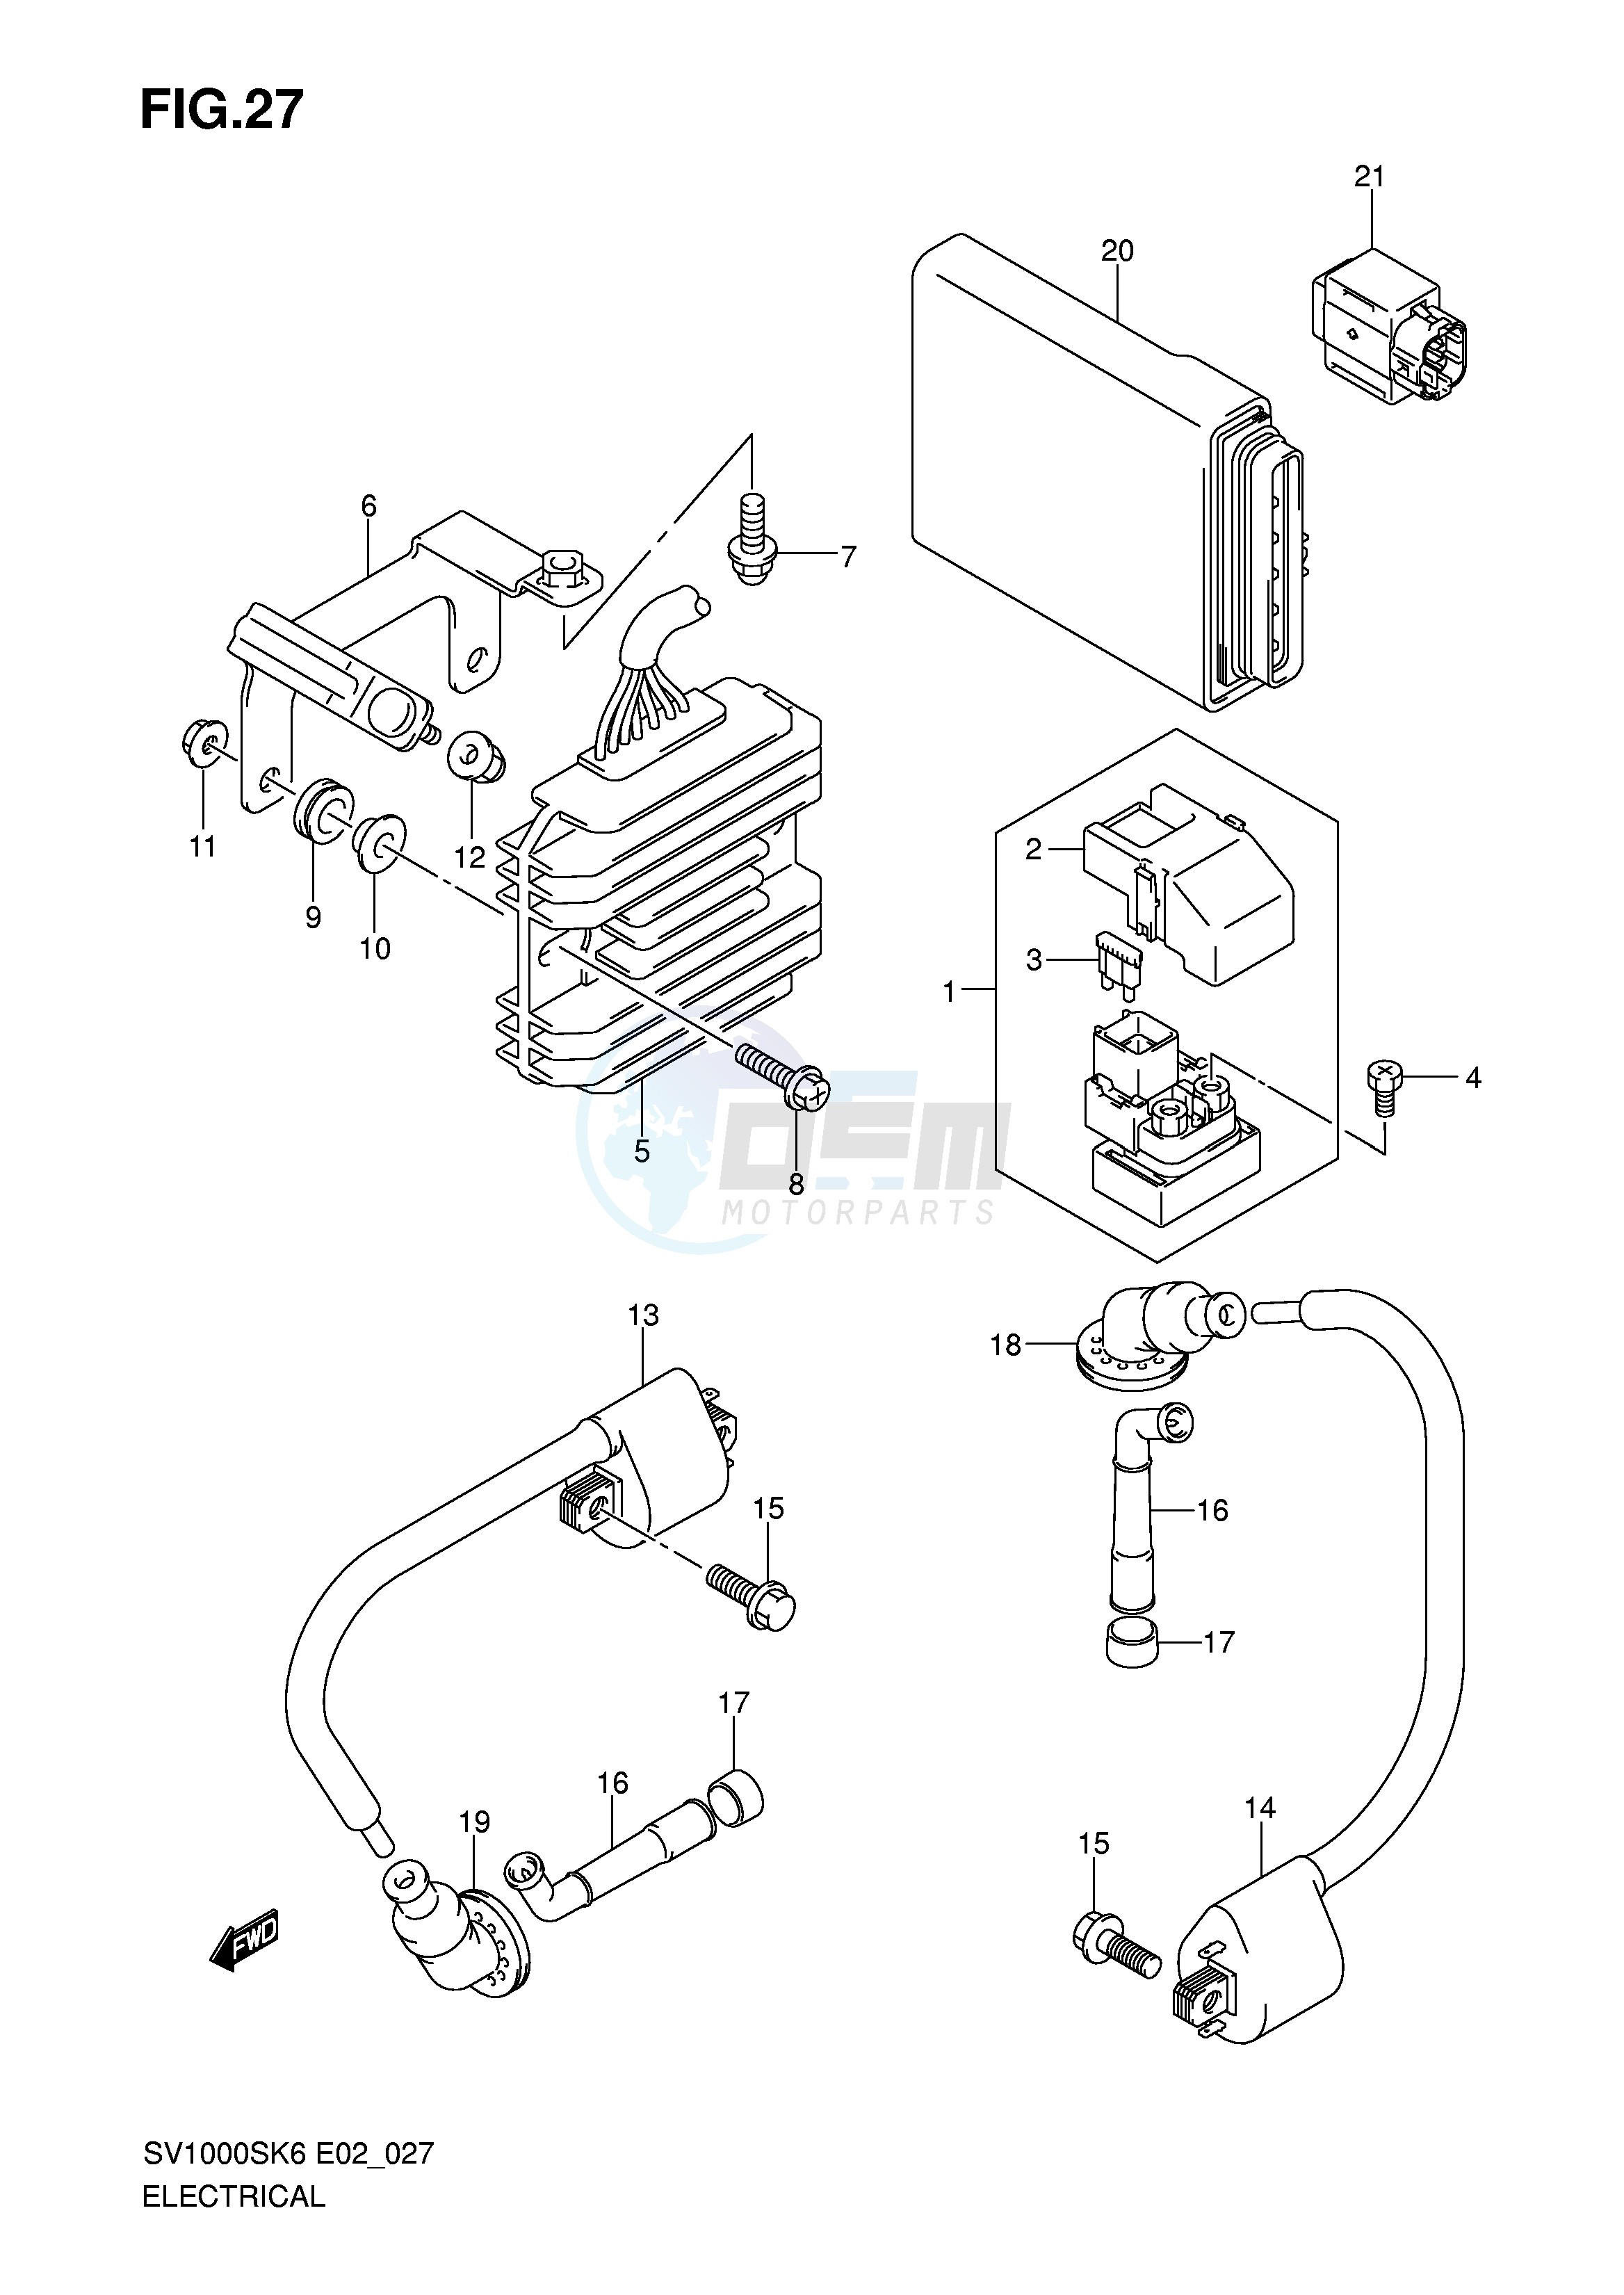 ELECTRICAL (SV1000S S1 S2) blueprint